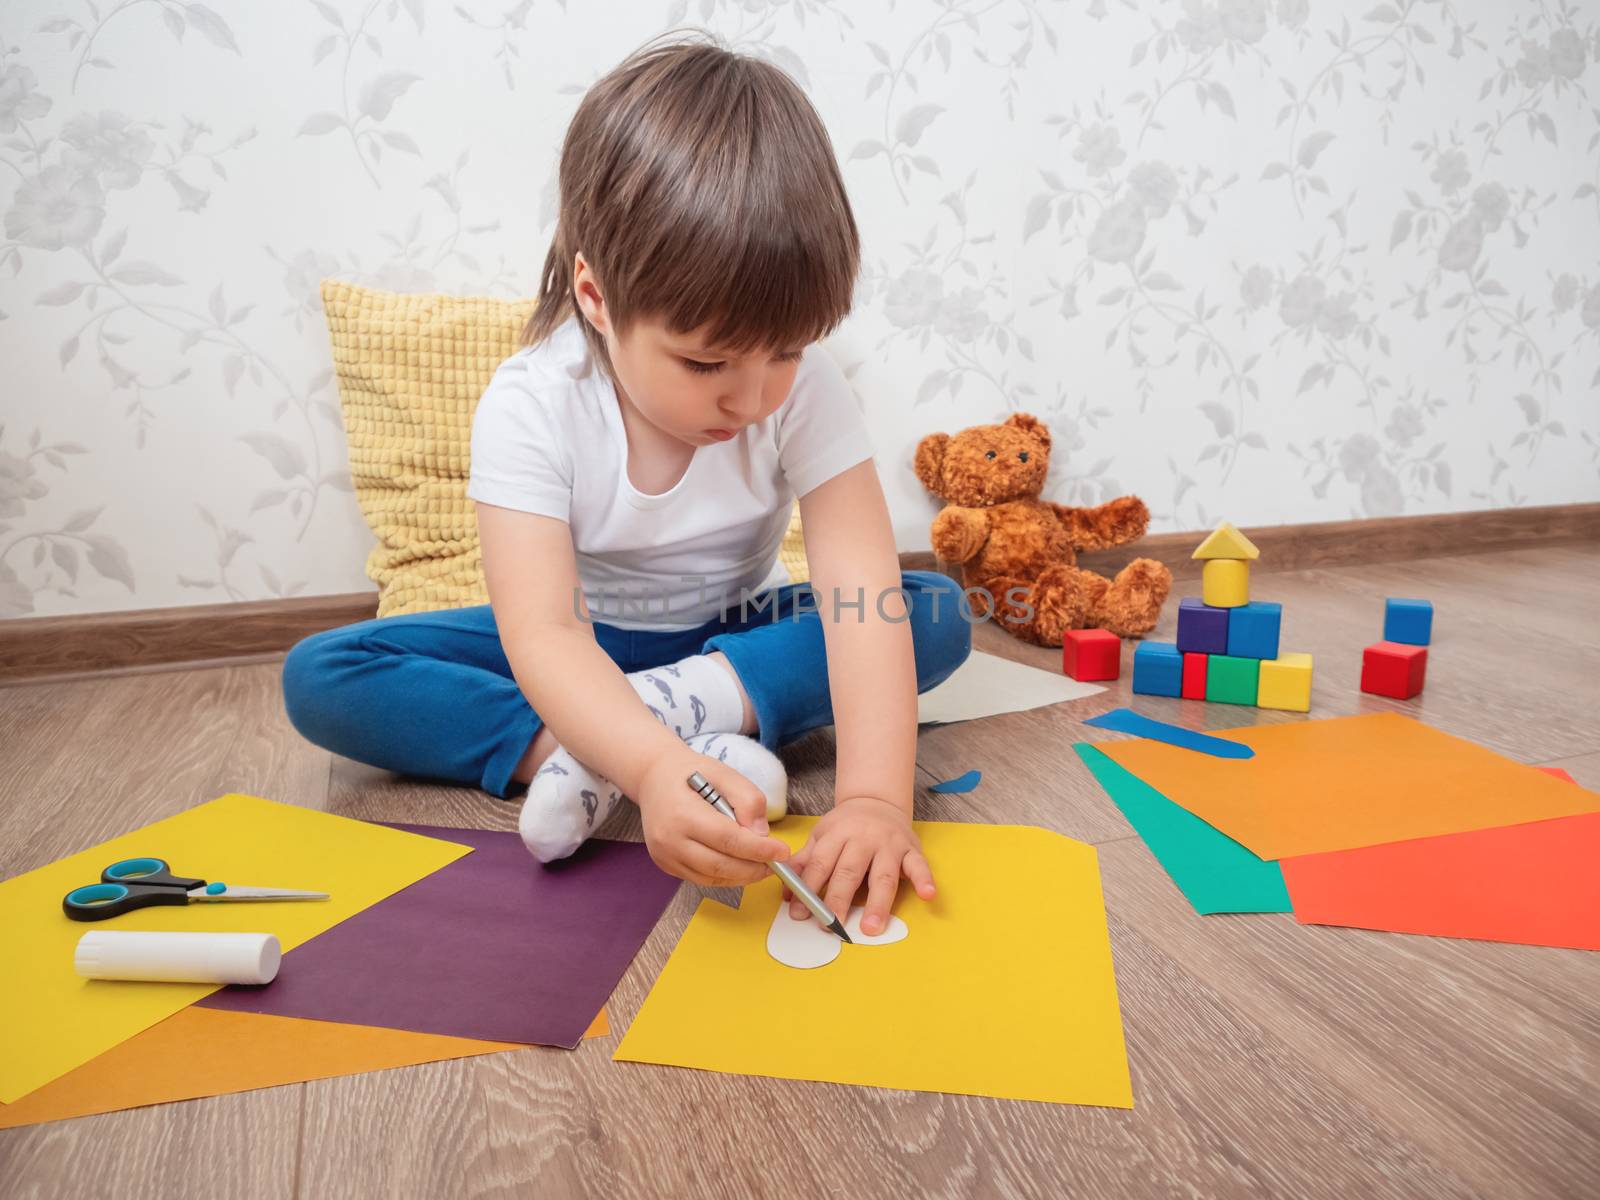 Toddler boy learns to cut colored paper with scissors. Kid sits on floor in kids room with toy blocks and teddy bear. Educational classes for children. Developing feeling sensations and fine motor skills at home.